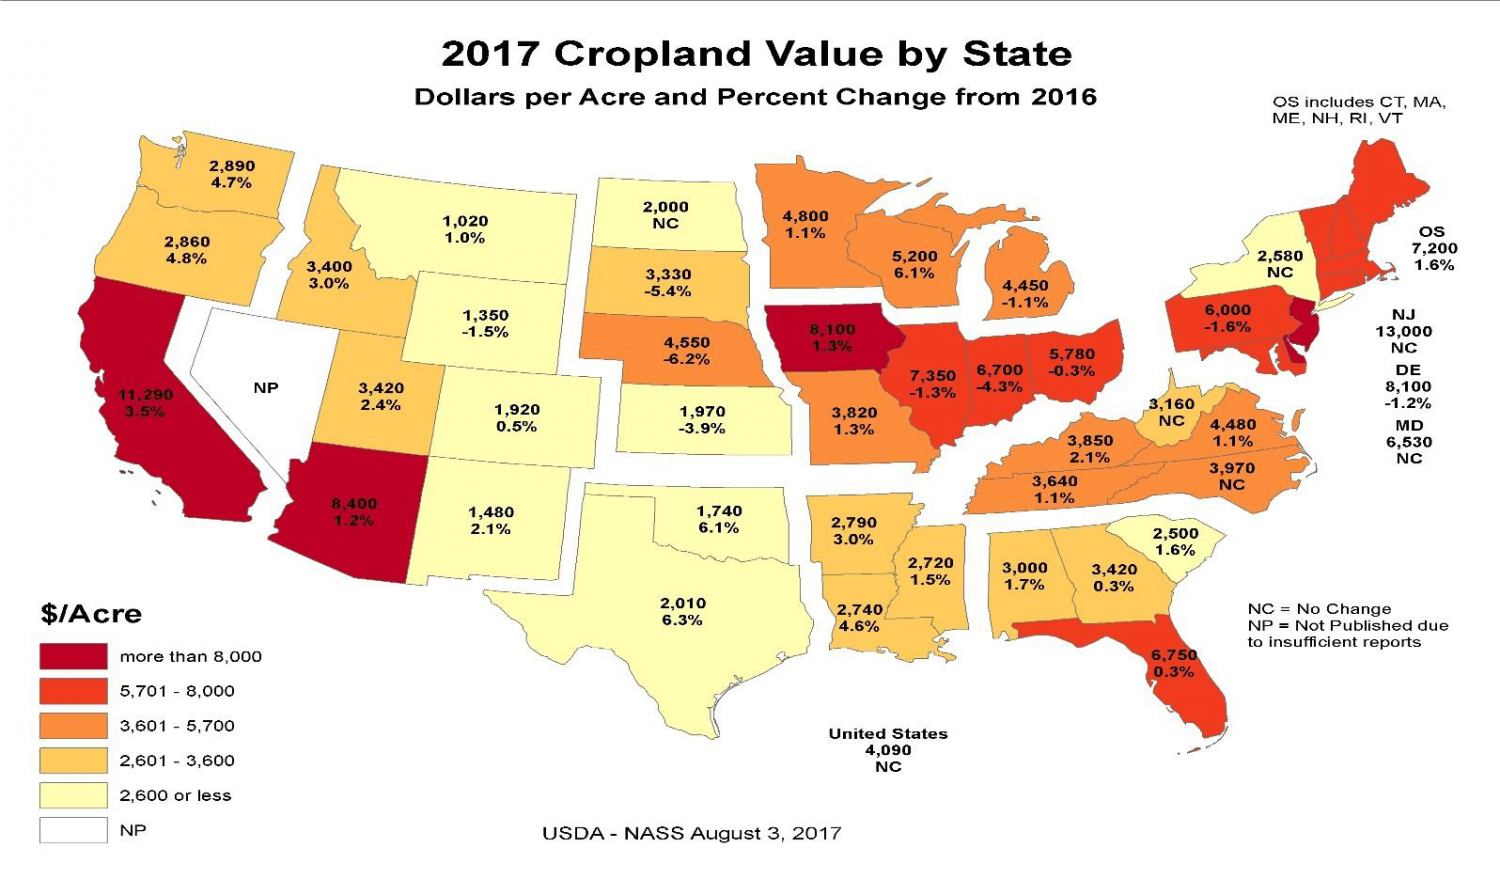 2017 Cropland Value By State